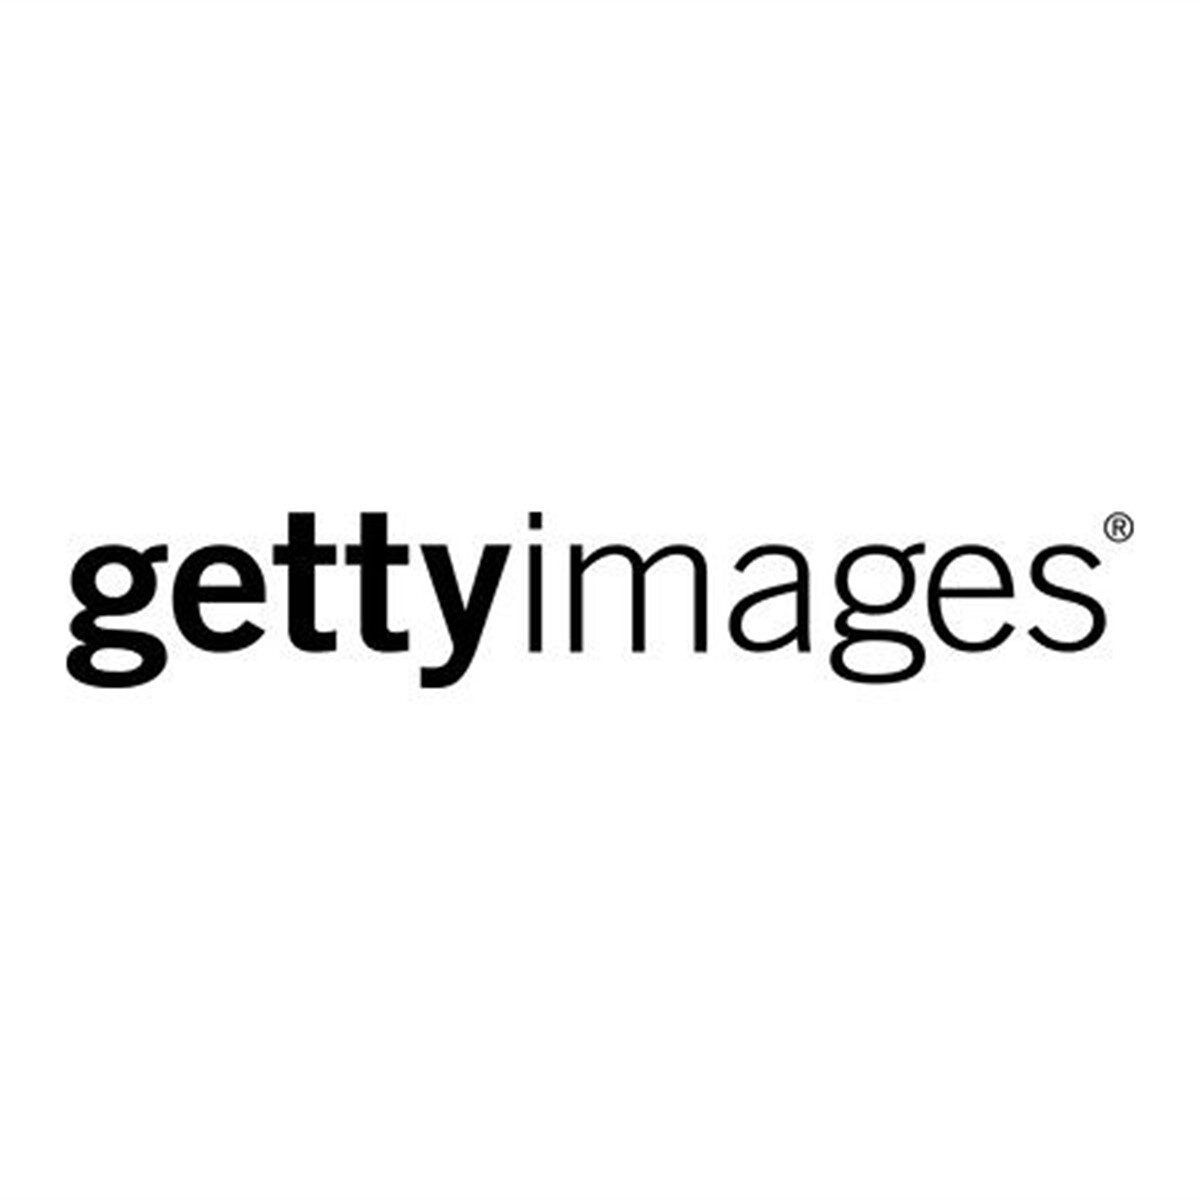 Getty_Images_Main.jpeg